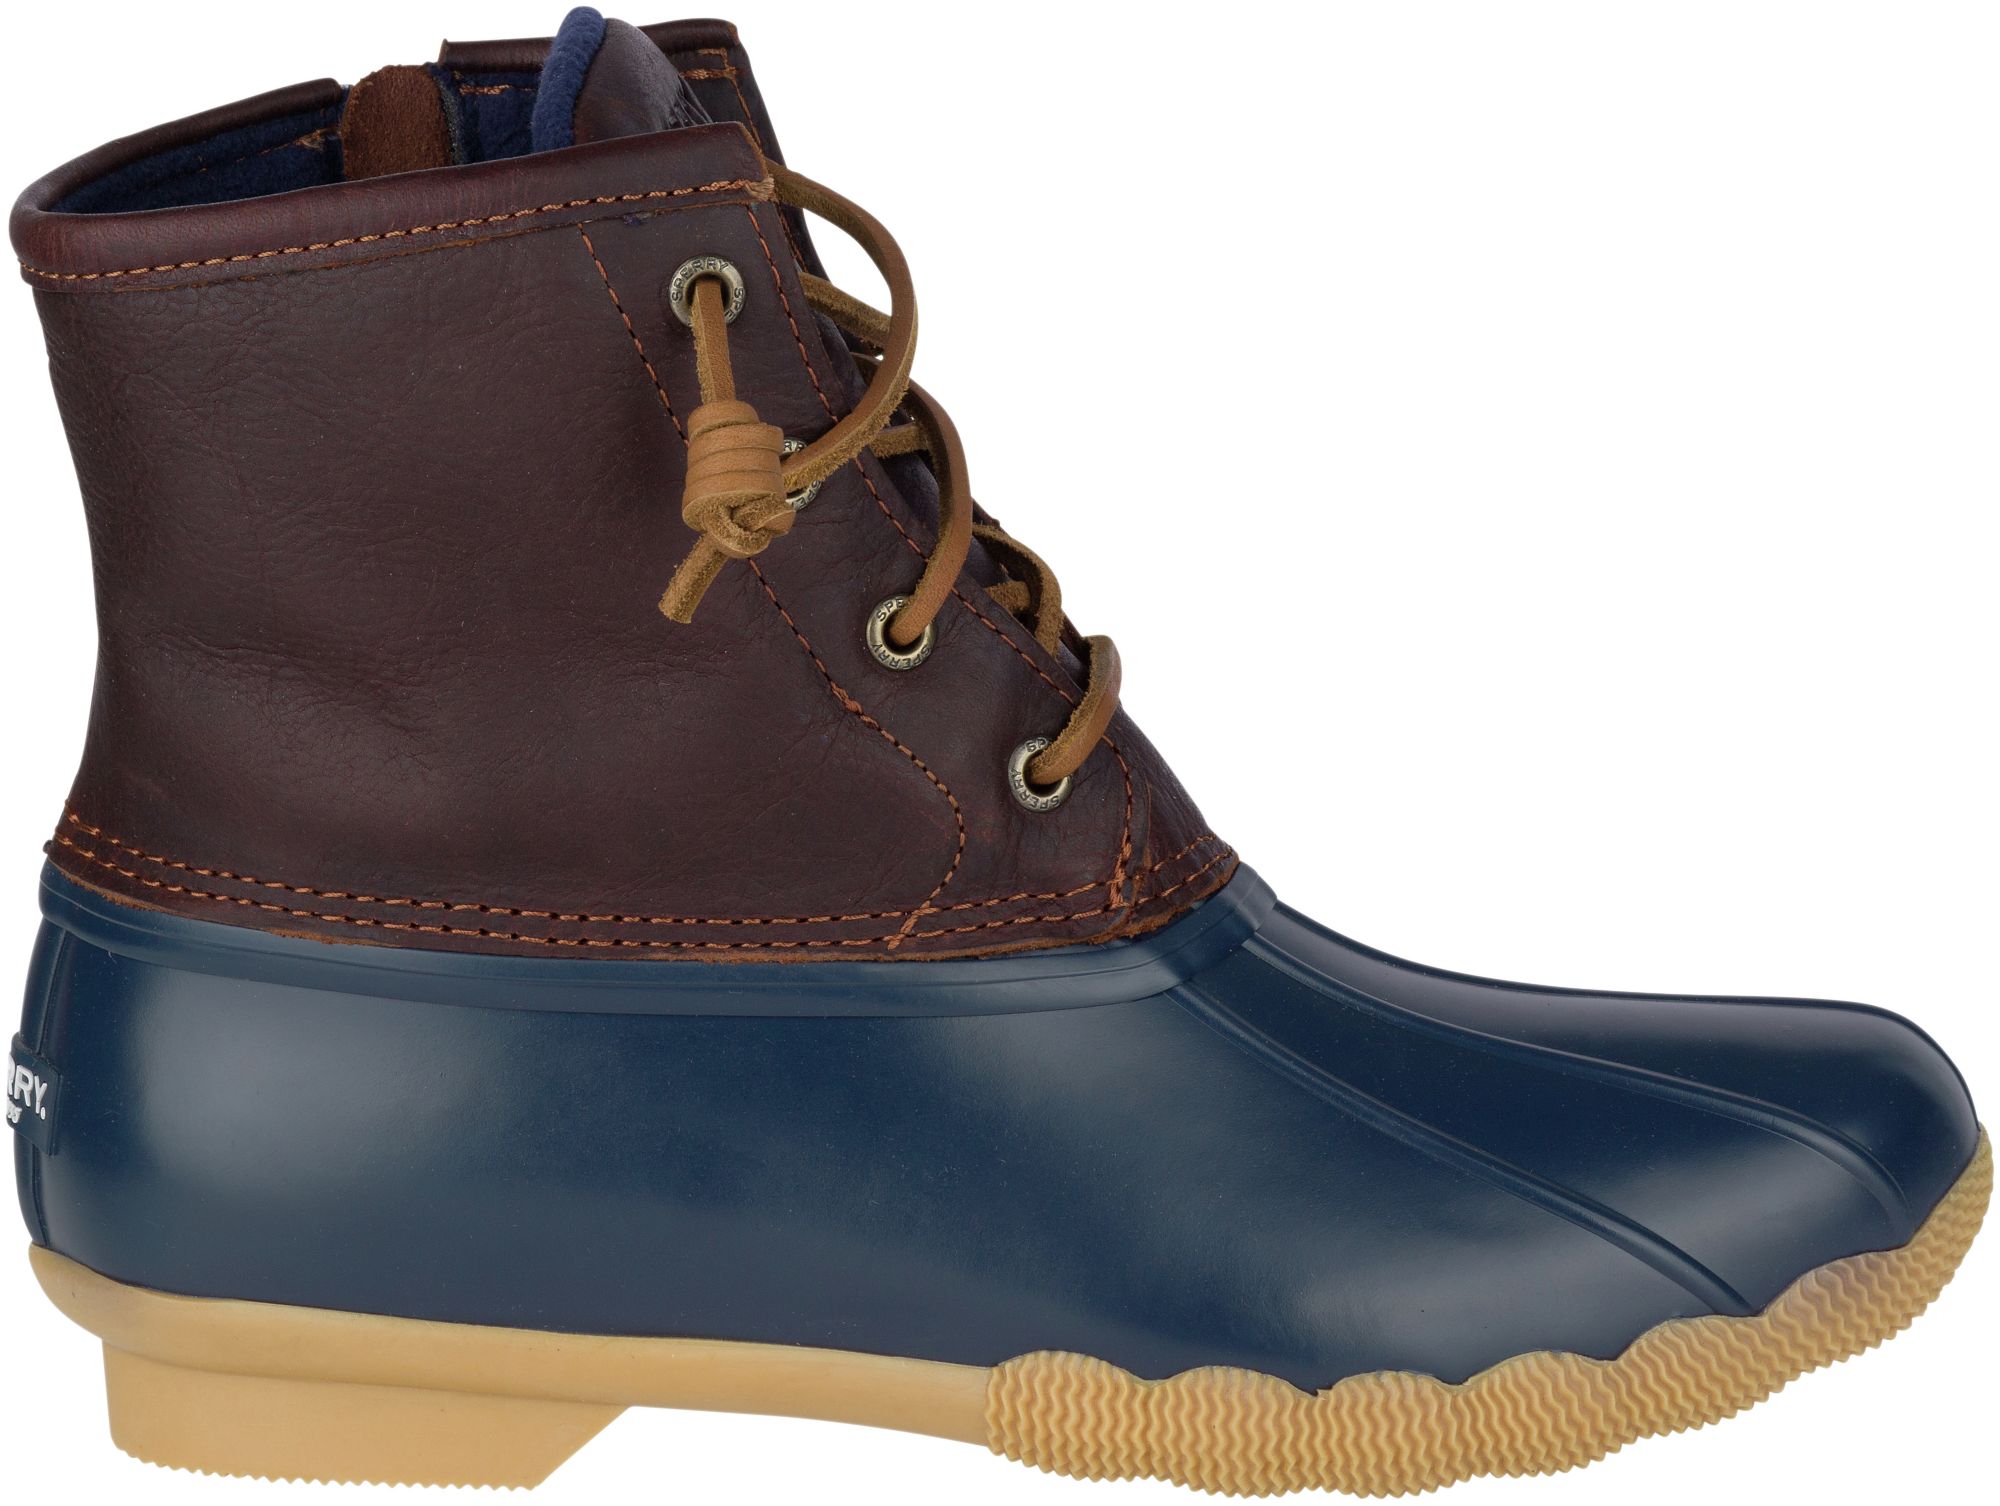 best deal on sperry duck boots